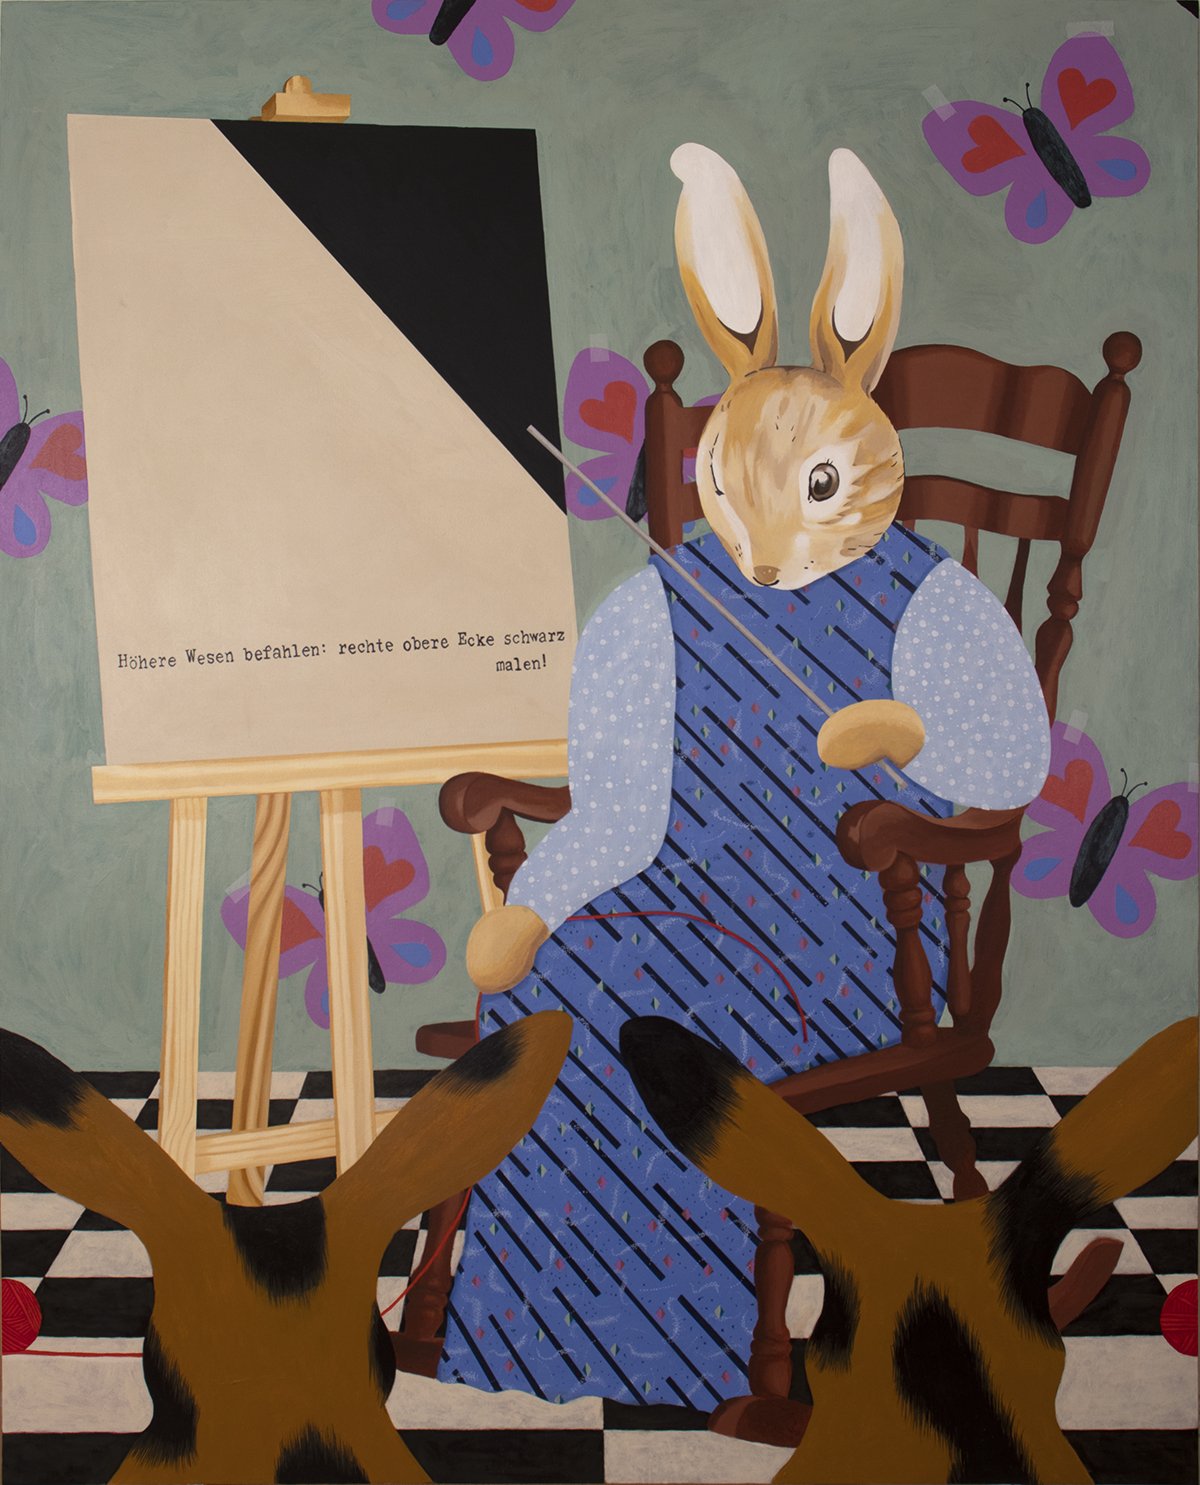   Rabbit Teaches Sigmar Polke’s  Higher Powers Commanded: Paint the Upper-Right Hand Corner Black!  60 x 48 inches  acrylic on canvas over panel  2022 